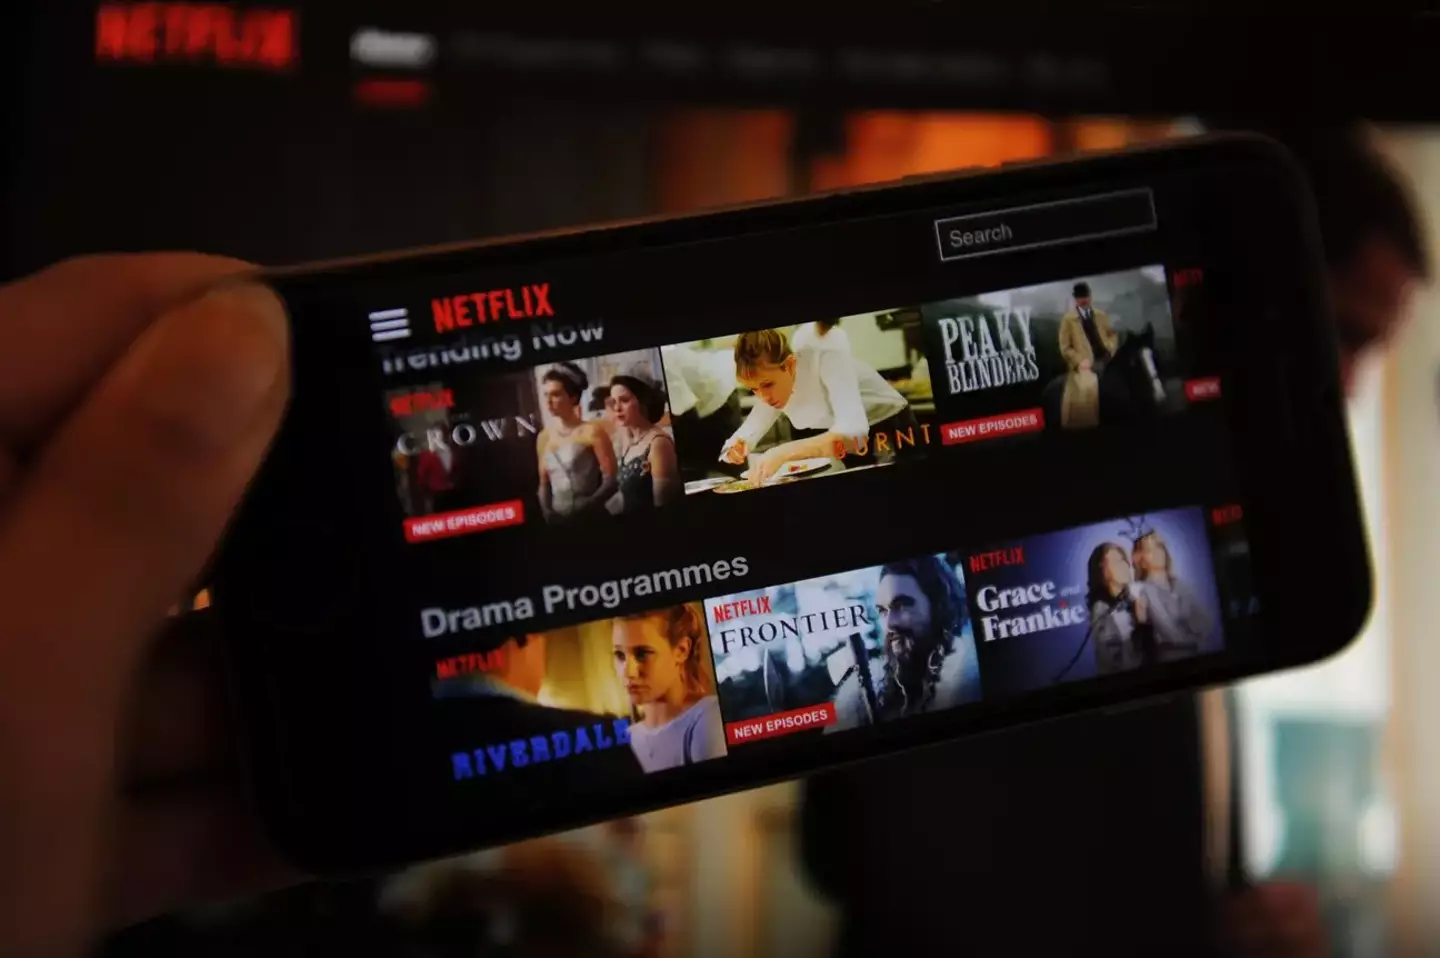 Netflix revealed cross-household password impacts their ability to invest.